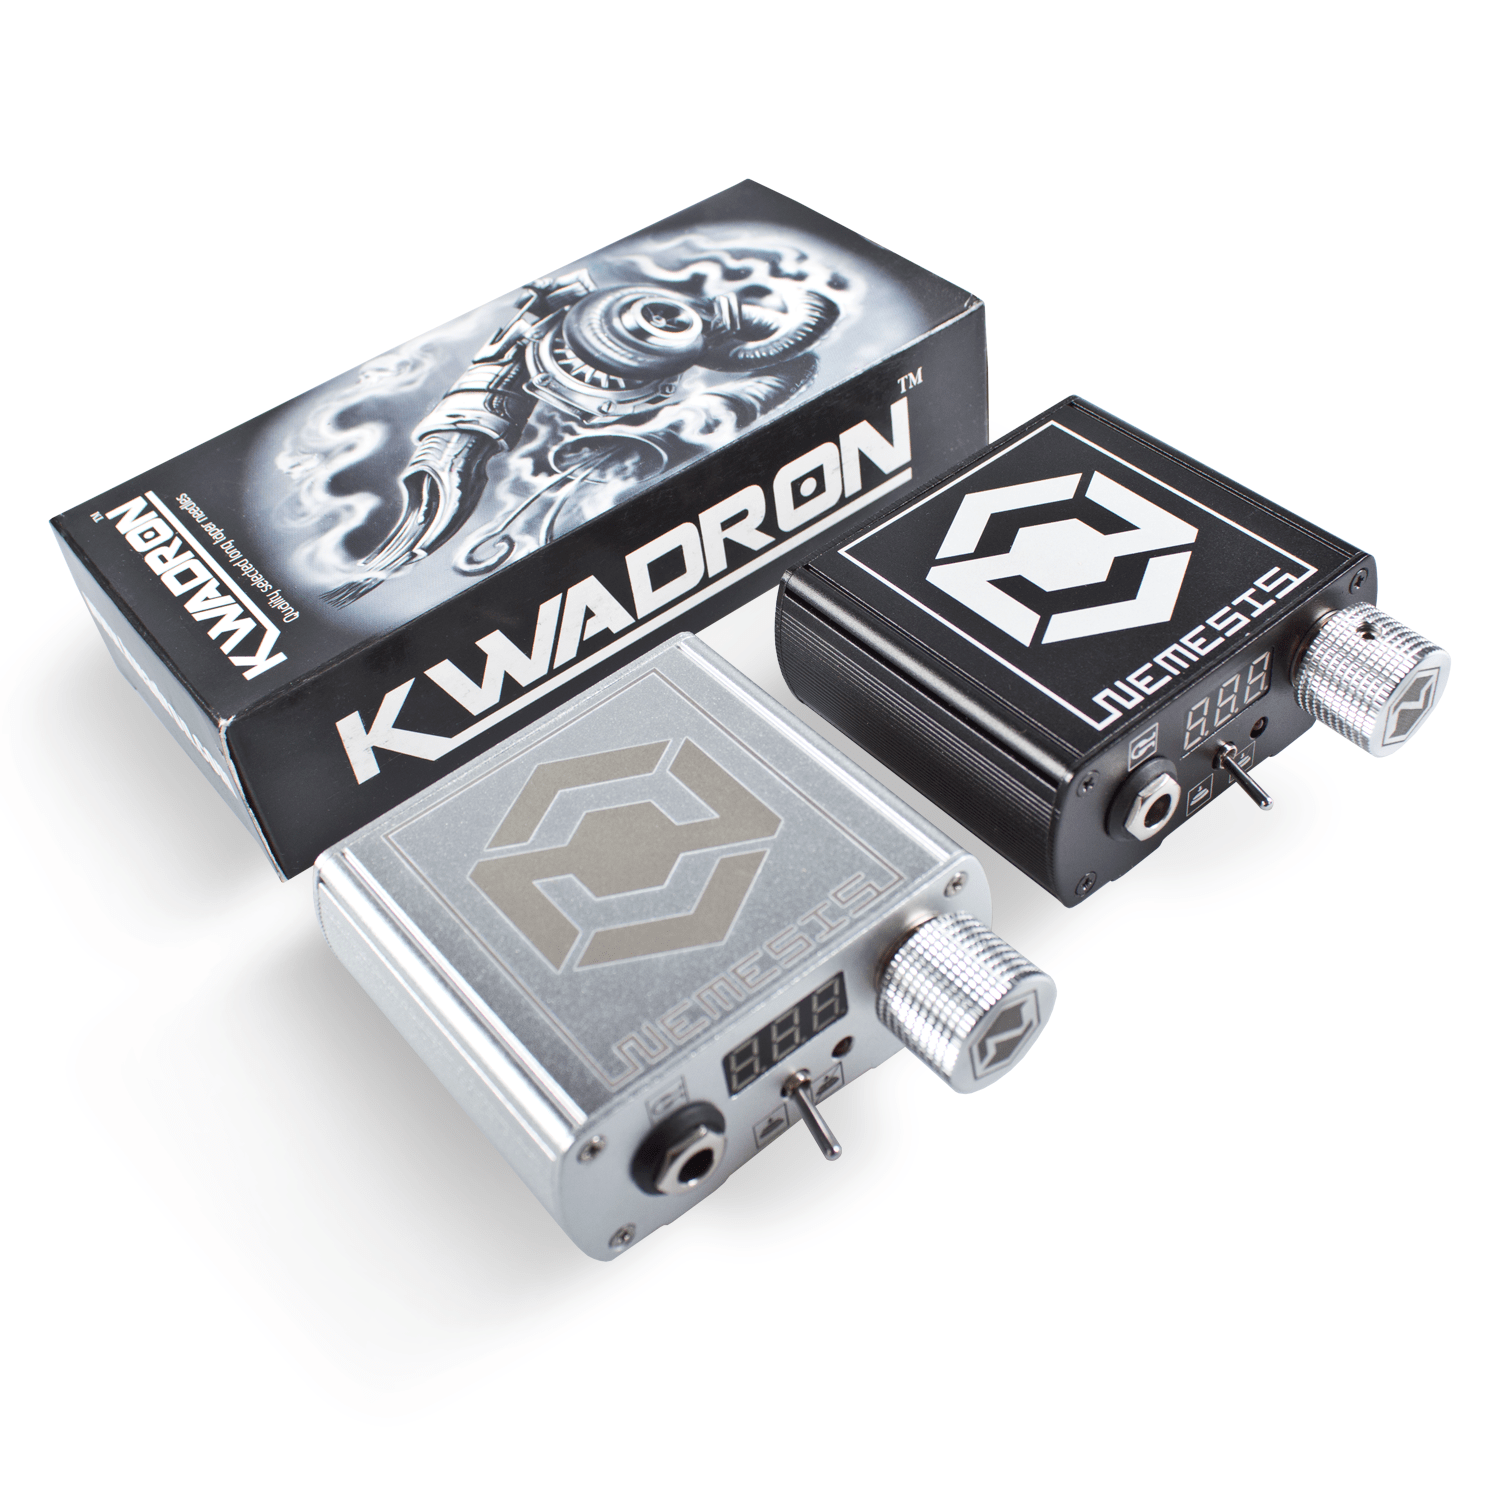 Nemesis Professional Tattoo Power Supply in Black by Kwadron Black and Silver 3